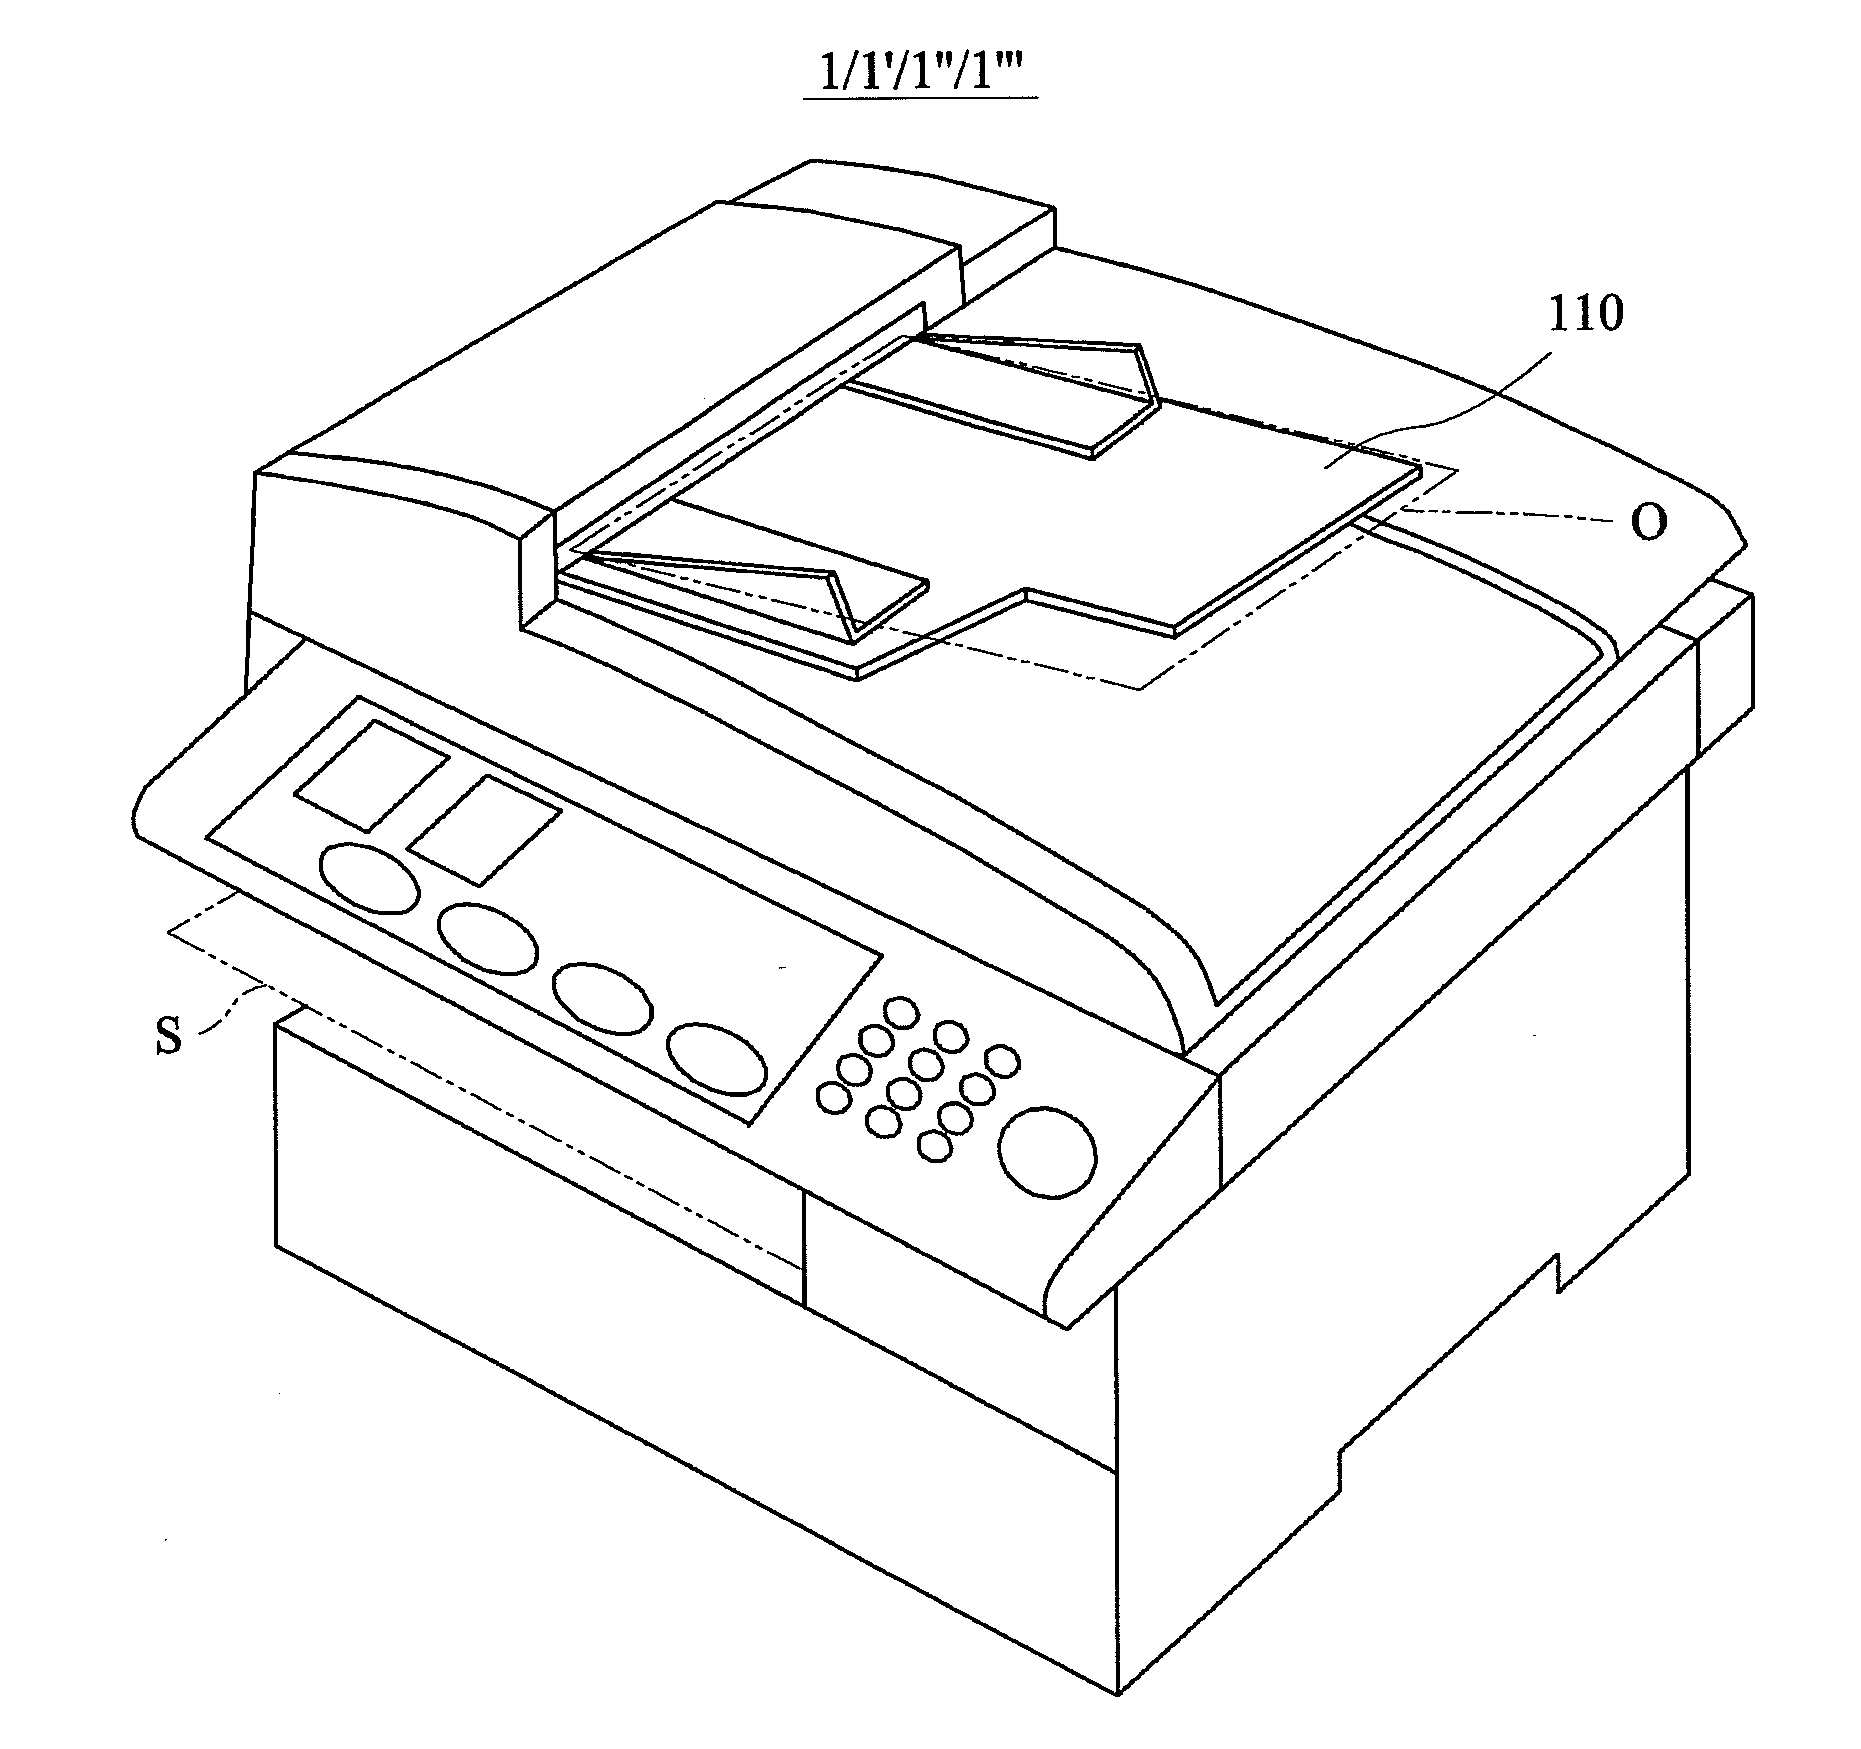 Duplex scanning apparatus with elastic pressing member disposed between two scan positions